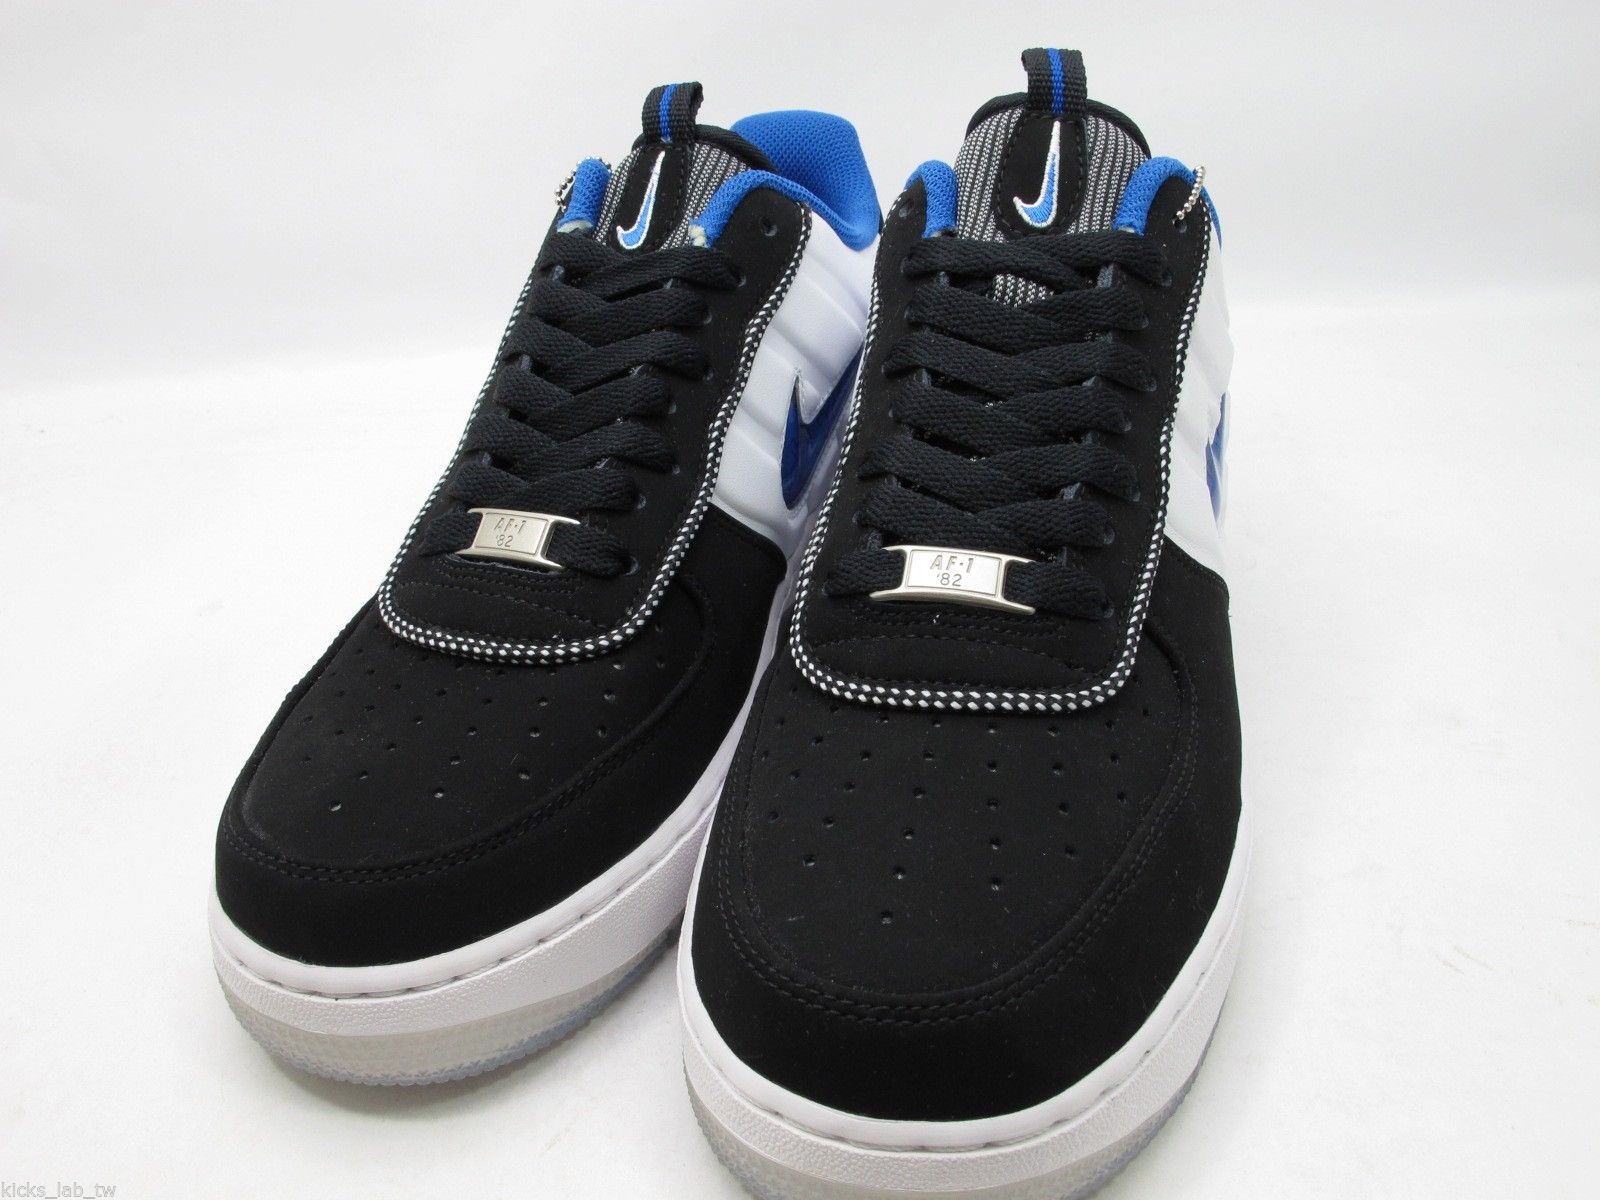 Nike Air Force 1 Low CMFT - Penny Hardaway - New Images